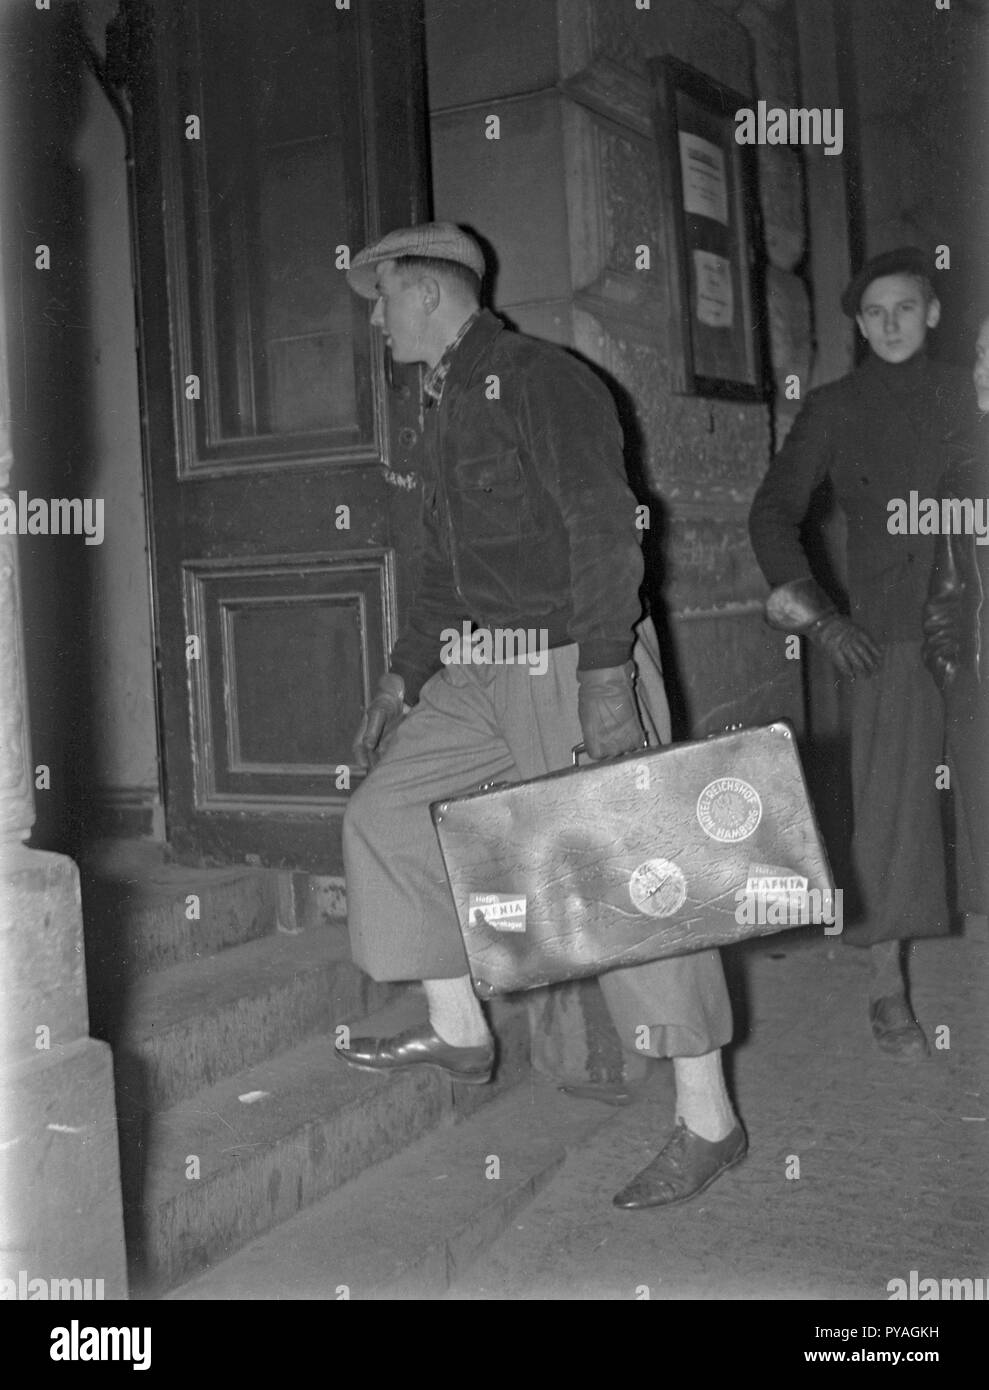 Man with suitcase in the 1930s. Swedish boxer Olle Tandberg 1918-1996, pictured on the stairs to his training gym. Tandberg fought in the 1936 Berlin Olympics and wa European heavyweight champion 1943. Picture taken 1939. Photo Kristoffersson ref L20 Stock Photo